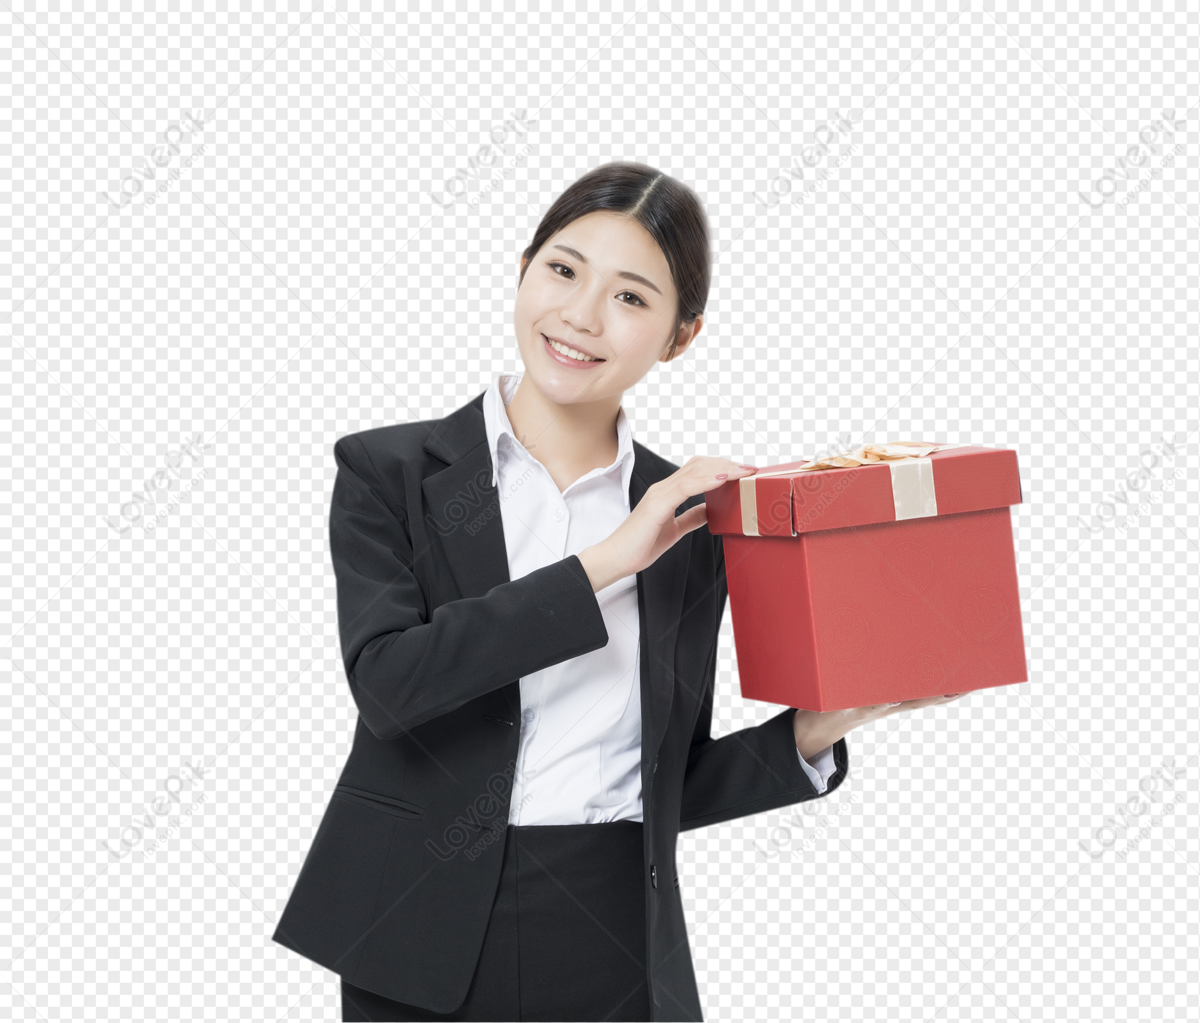 Professional woman giving a present, Gift, portrait, company png transparent image